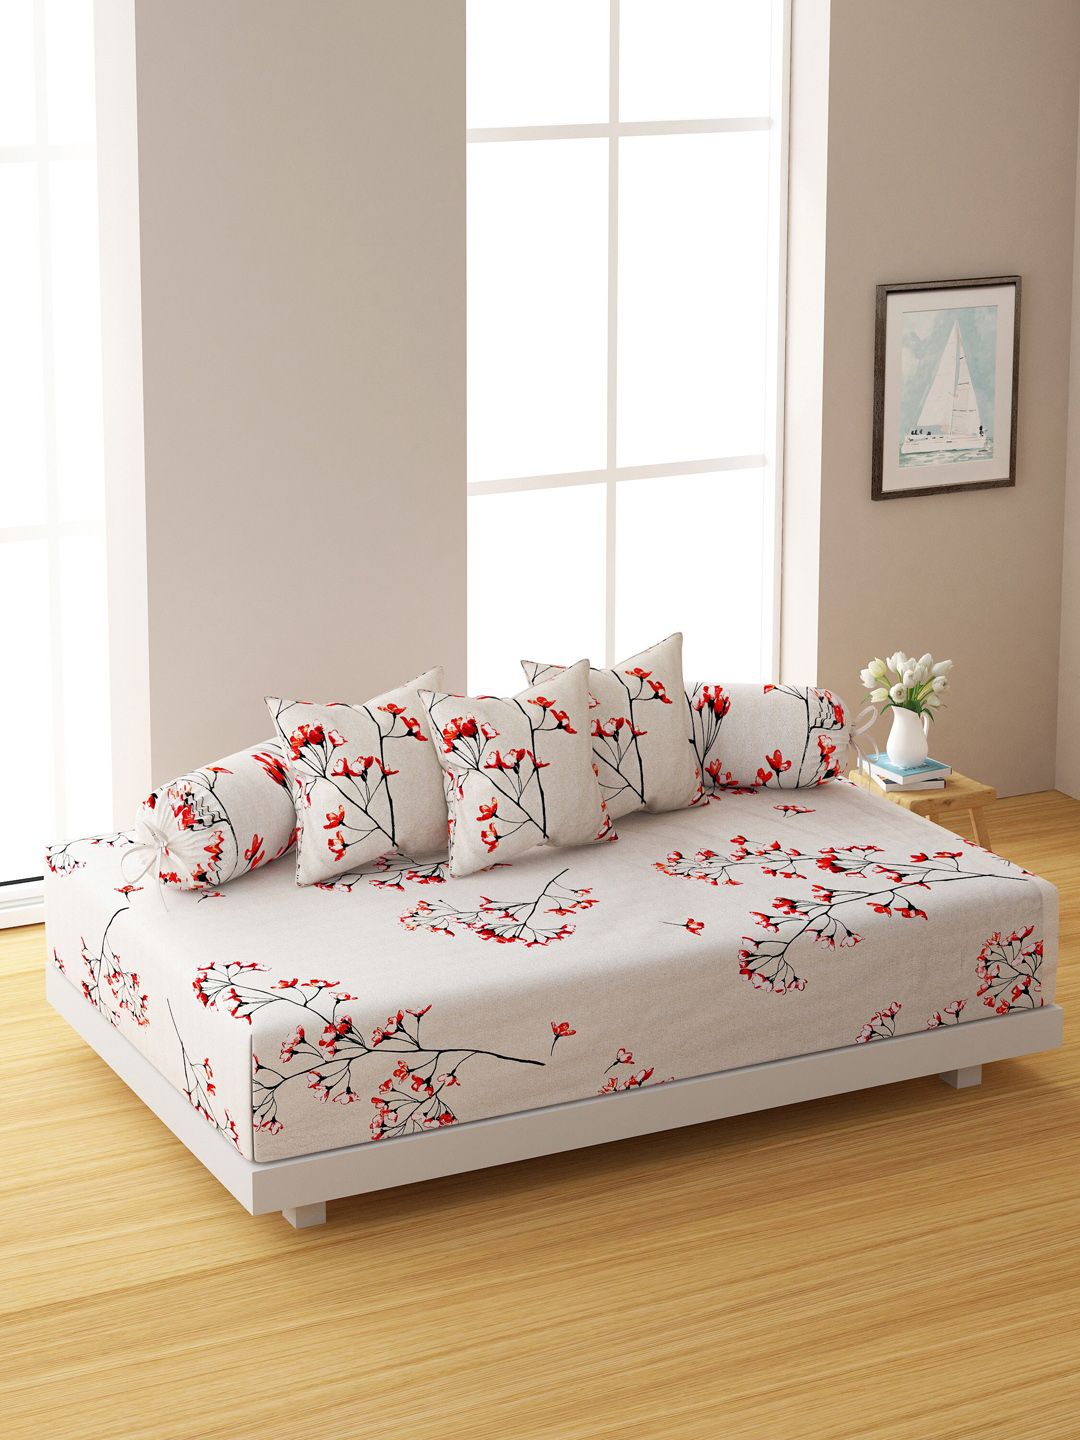 SWAYAM Set Of 6 Beige & Red Floral Printed 200 TC Bedsheet With Bolster & Cushion Covers Price in India